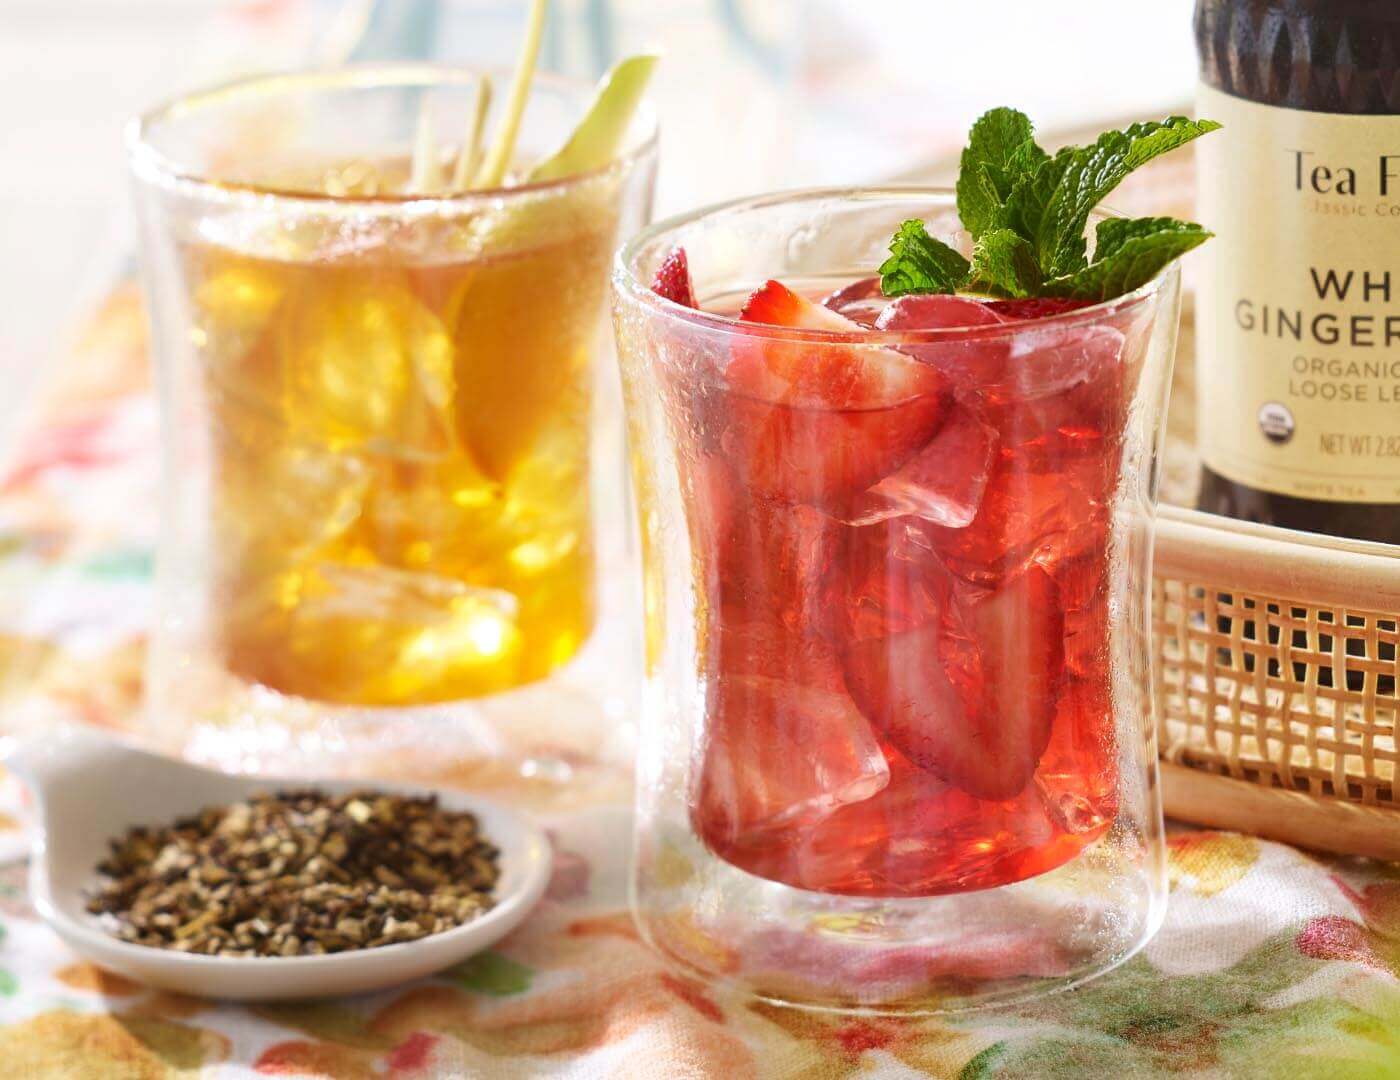 Iced tea with garnishes in Poom glasses